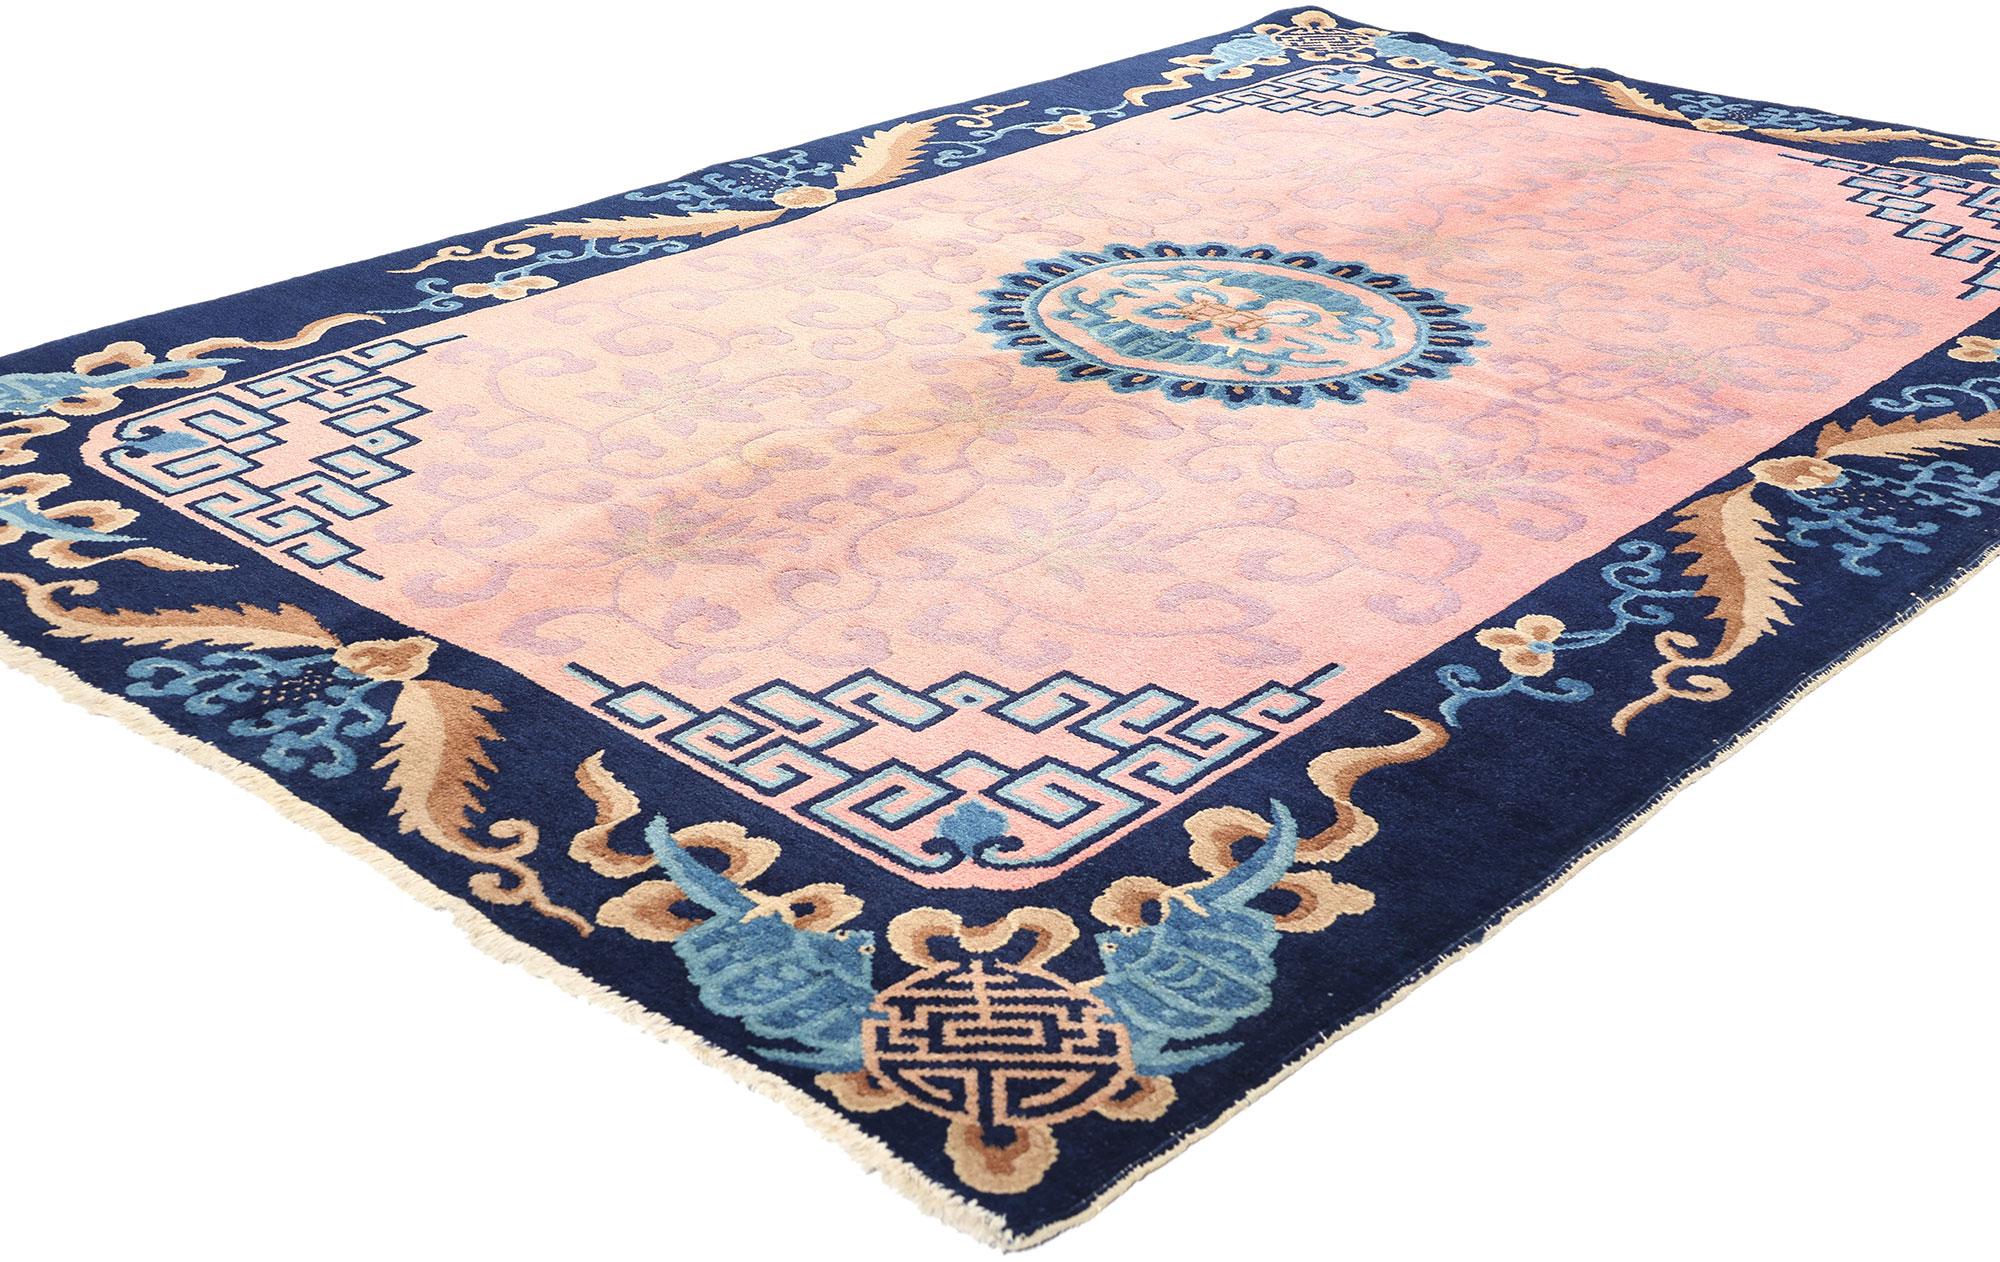 78184 Antique Pink Chinese Art Deco Rug, 05'02 x 07'11. Antique Chinese Art Deco rugs emerged as a distinct style during the 1920s and 1930s in China, seamlessly marrying traditional rug-making methods with the avant-garde principles of Art Deco